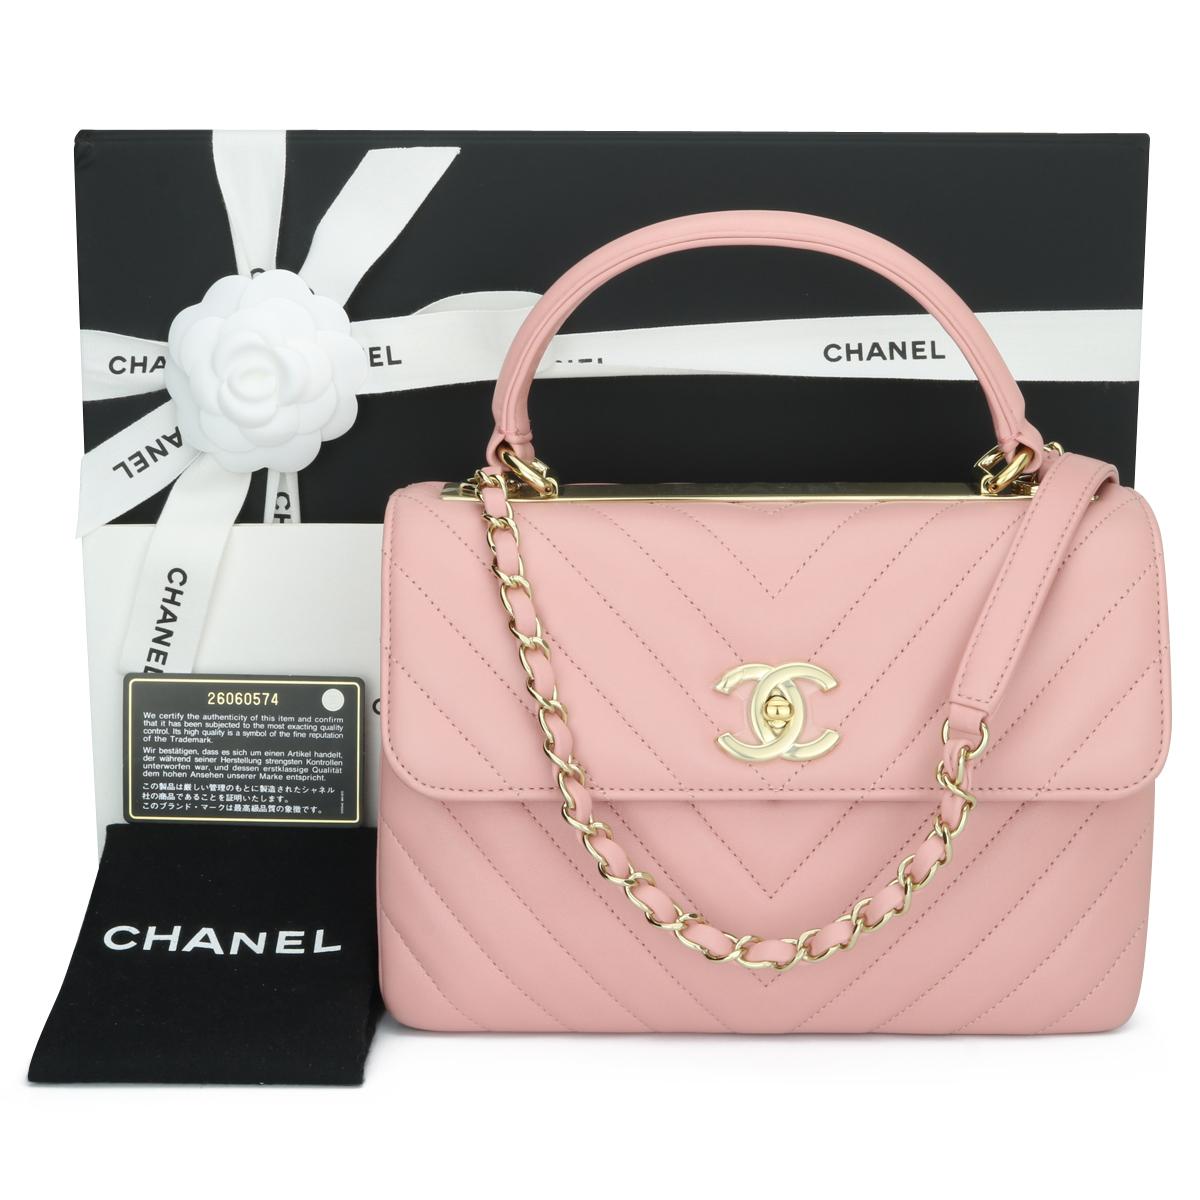 Authentic CHANEL Trendy CC Top Handle Bag Small Chevron Light Pink Lambskin with Light Gold Hardware 2018.

This stunning bag is in pristine-as new condition, the bag still holds its original shape, and the hardware is still very shiny. The leather